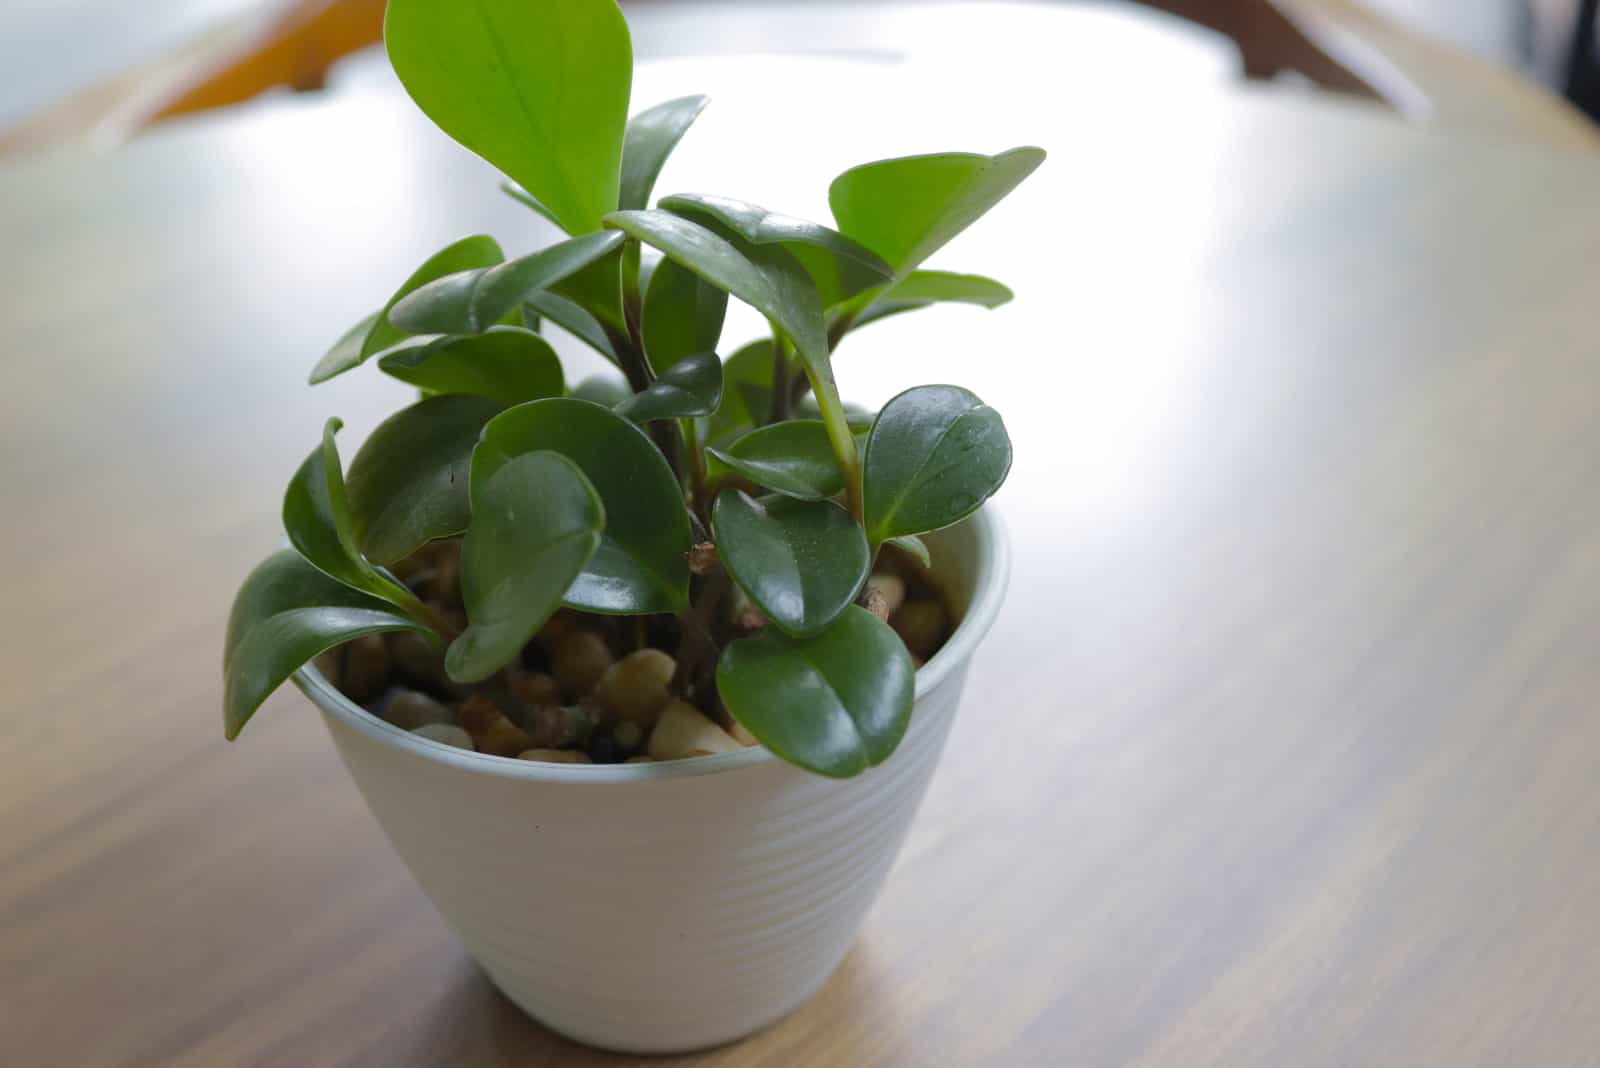 Peperomia rana verde plant on the table